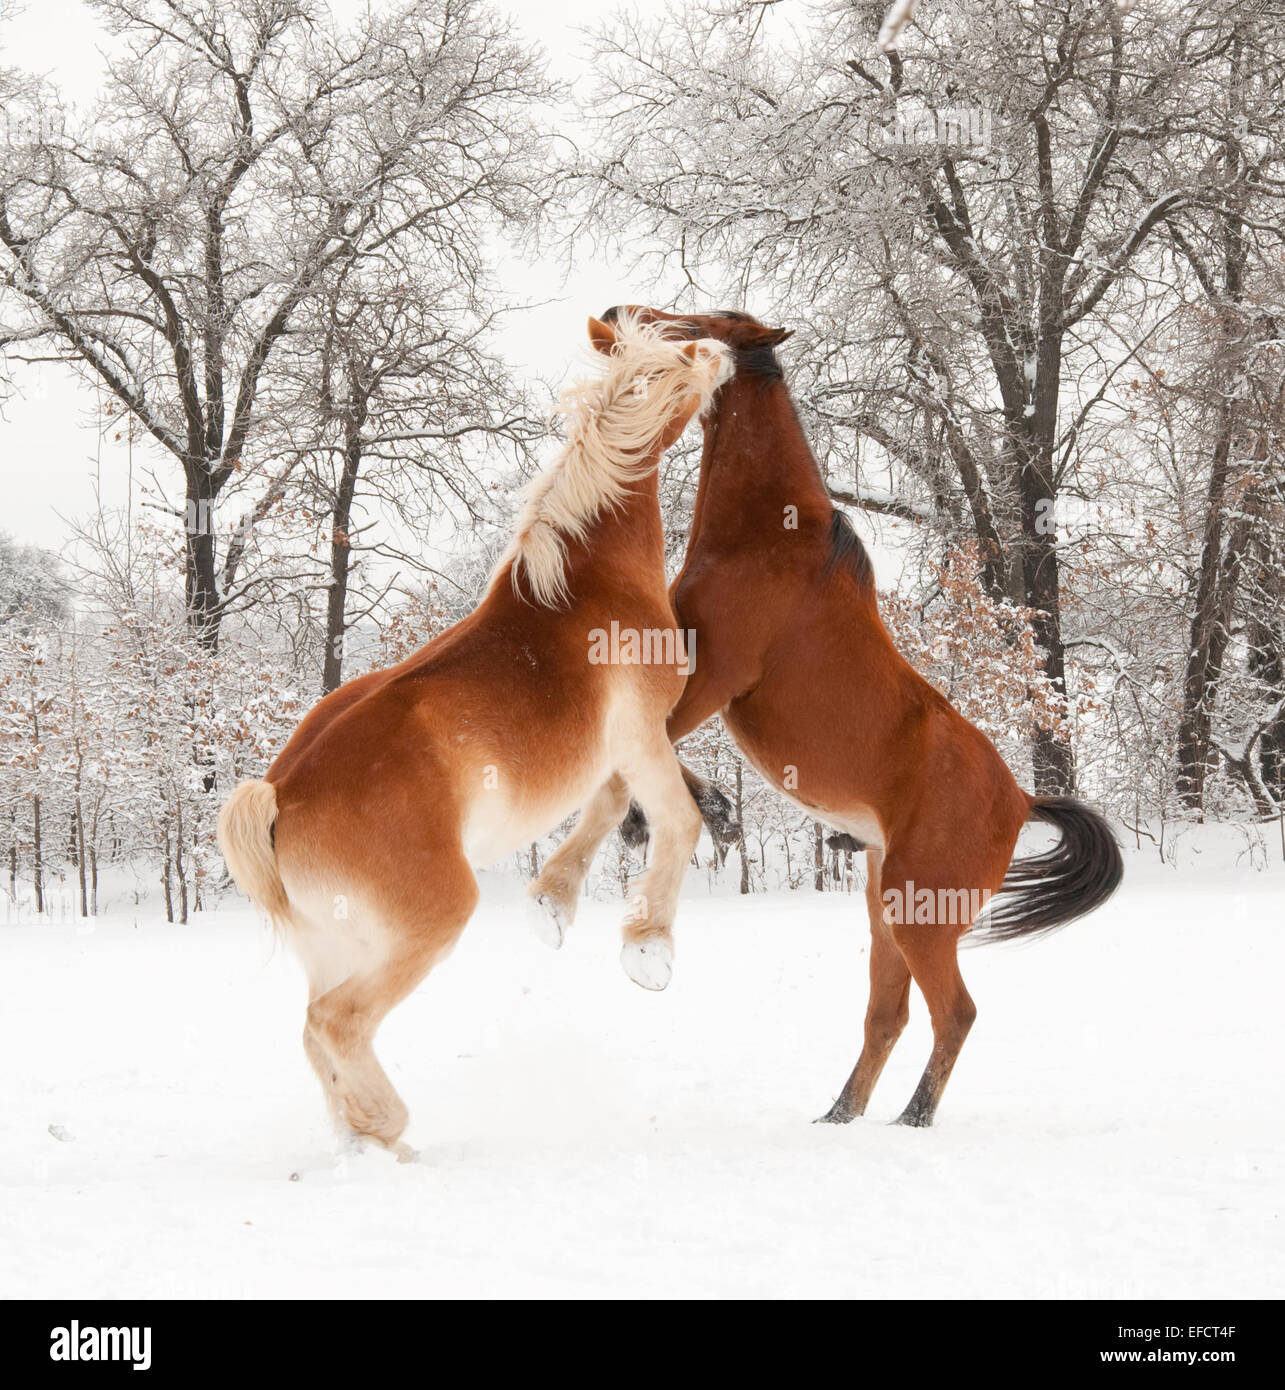 Two horses playing in snow, rearing up Stock Photo